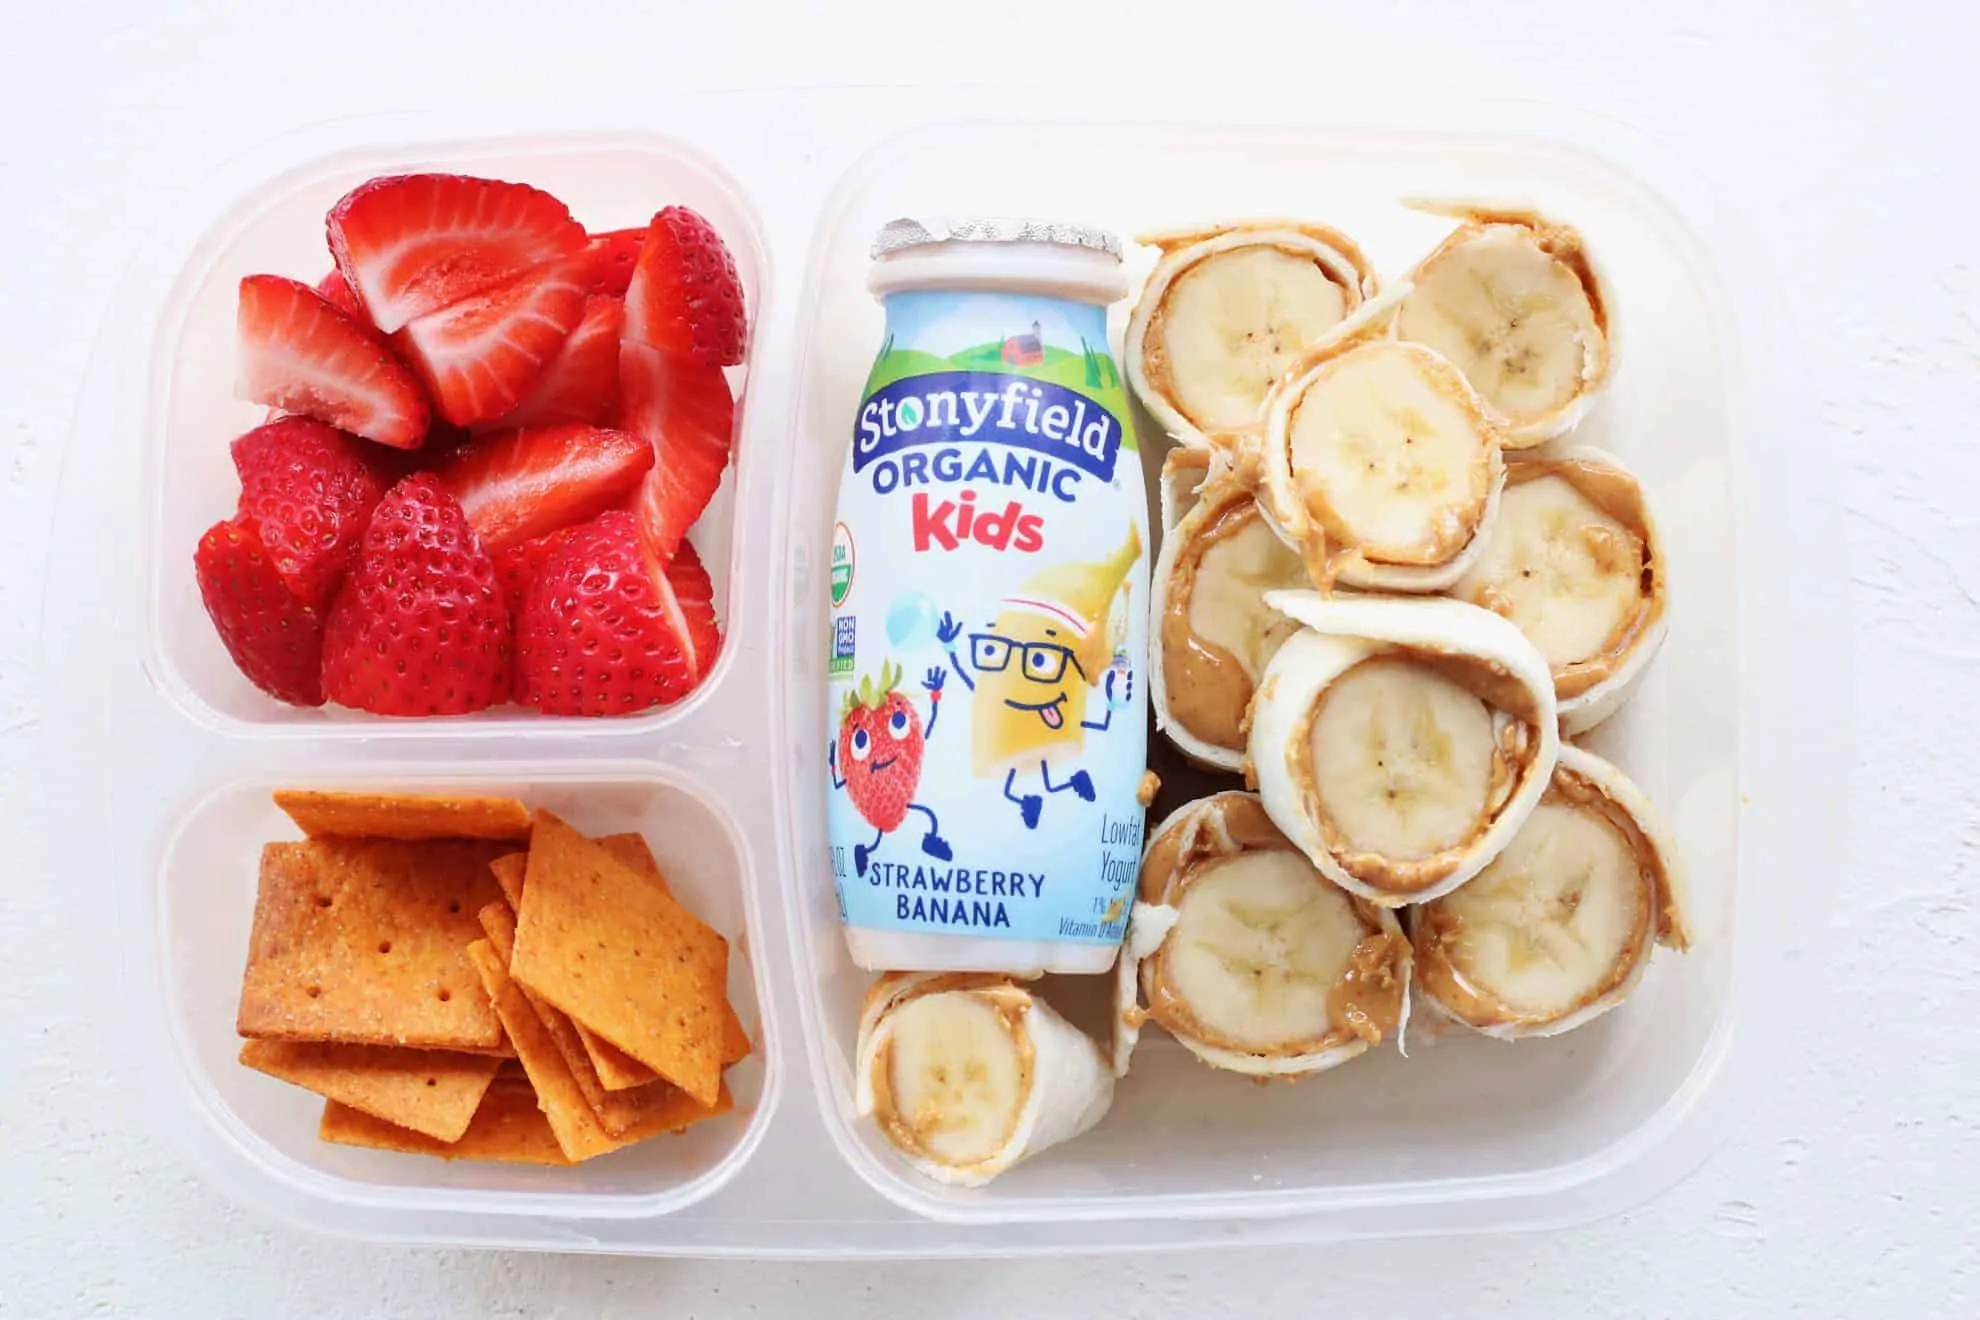 FIVE Healthy Lunch Box Ideas - The Toasted Pine Nut